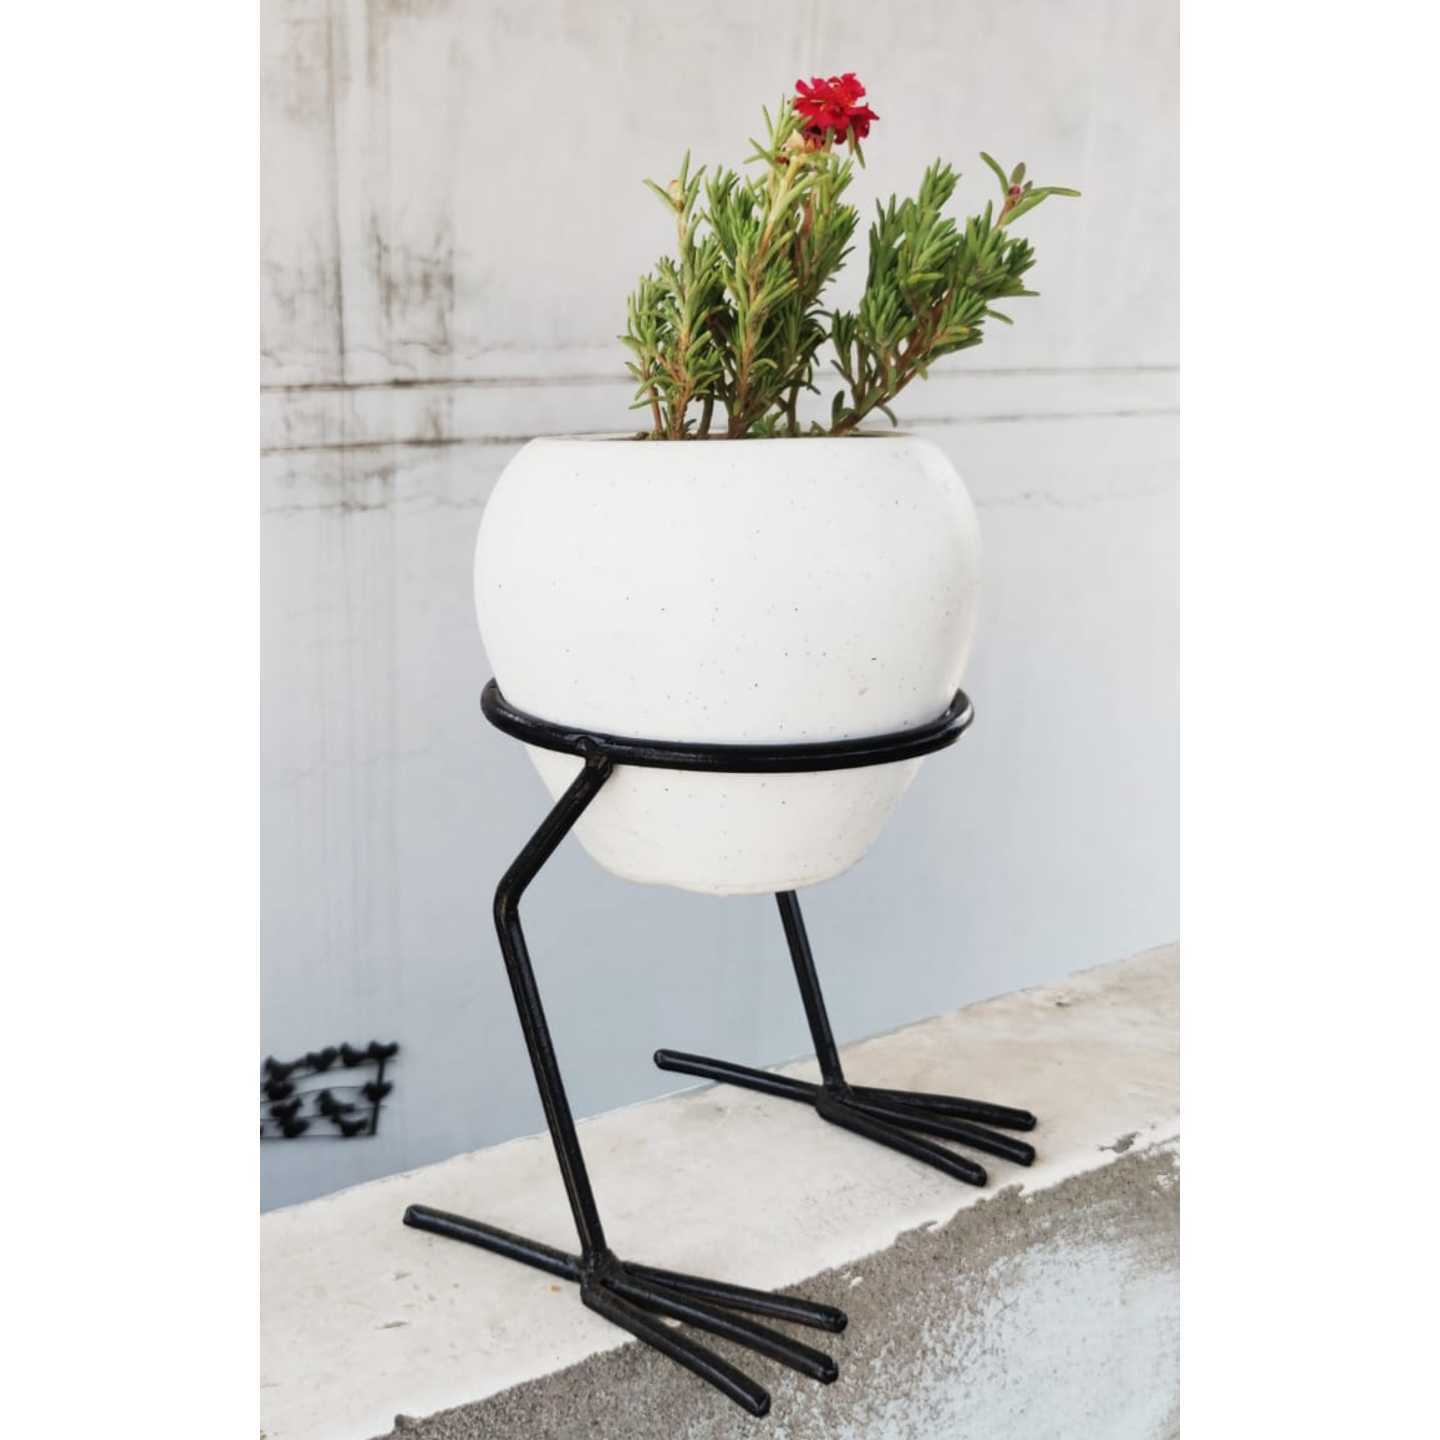 Free Standing Duck Leg Iron Planter Stand with Flower Pot Black 6.50 x 6 Inch … 